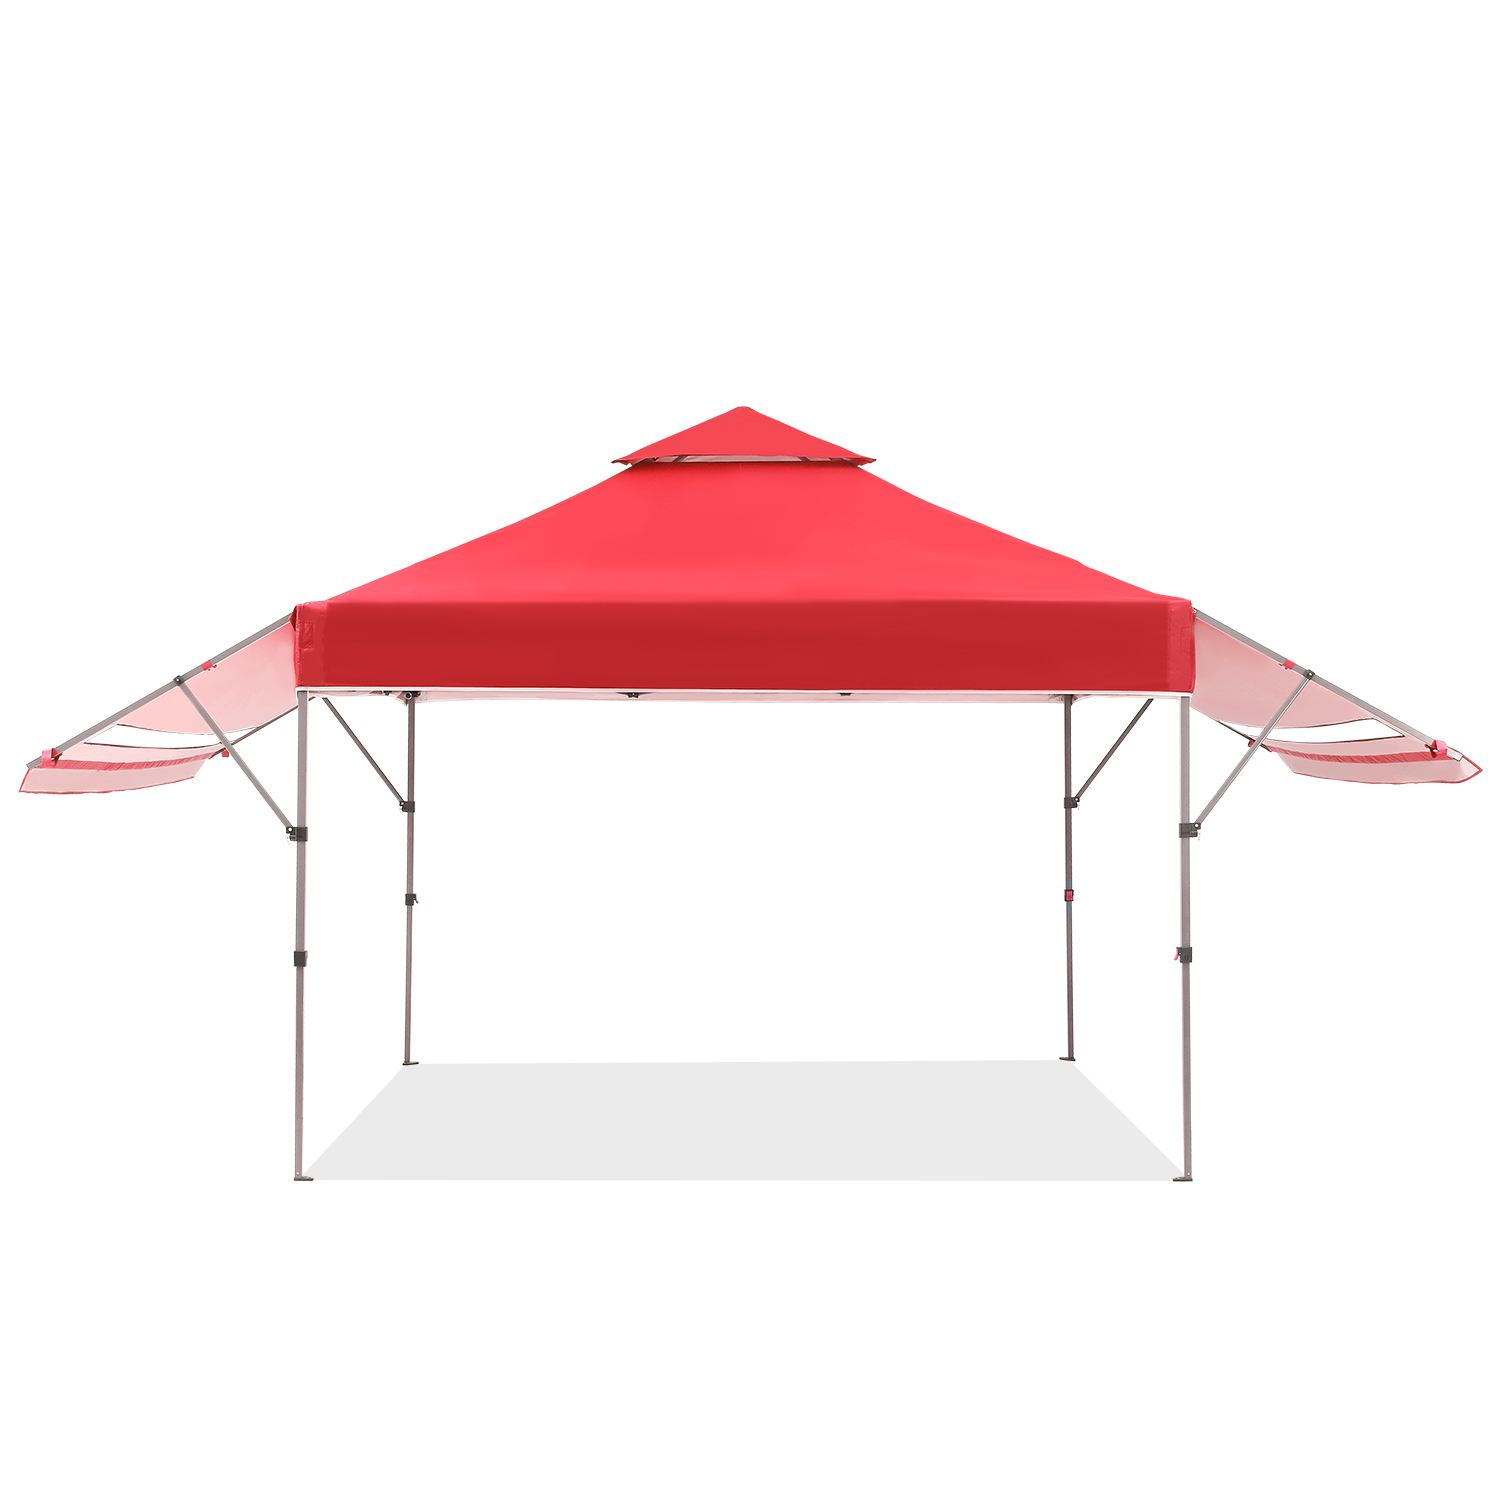 10 Ft. W x 17 Ft. D Steel Frame Pop-Up Red Canopy, $99 +Free Shipping